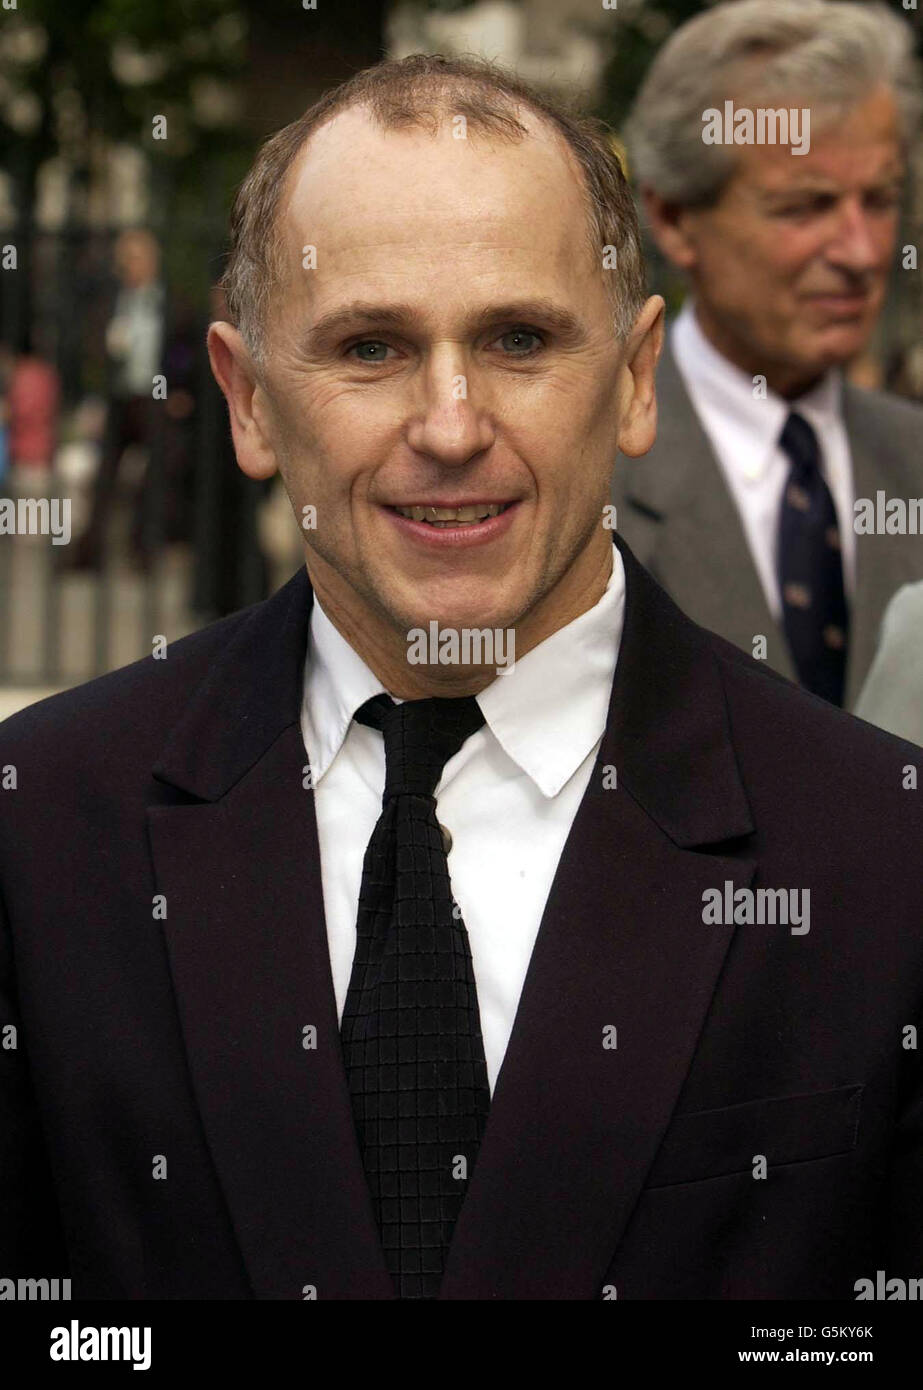 Former Royal Ballet dancer, Wayne Sleep, after attending the memorial service at Westminster Abbey, London of Royal Ballet founder Dame Ninette de Valois. * .... 71-year-old Princess Margaret, who has suffered two strokes, attended the service dressed in black and wearing heavy dark glasses. Confined to a wheelchair, her face looked puffy, an apparent side-effect of medication. Margaret, a knowledgable fan of ballet and Royal Ballet president, was among VIPs from the world of dance to honour the life of the Dame who died in her sleep, aged 102. Stock Photo